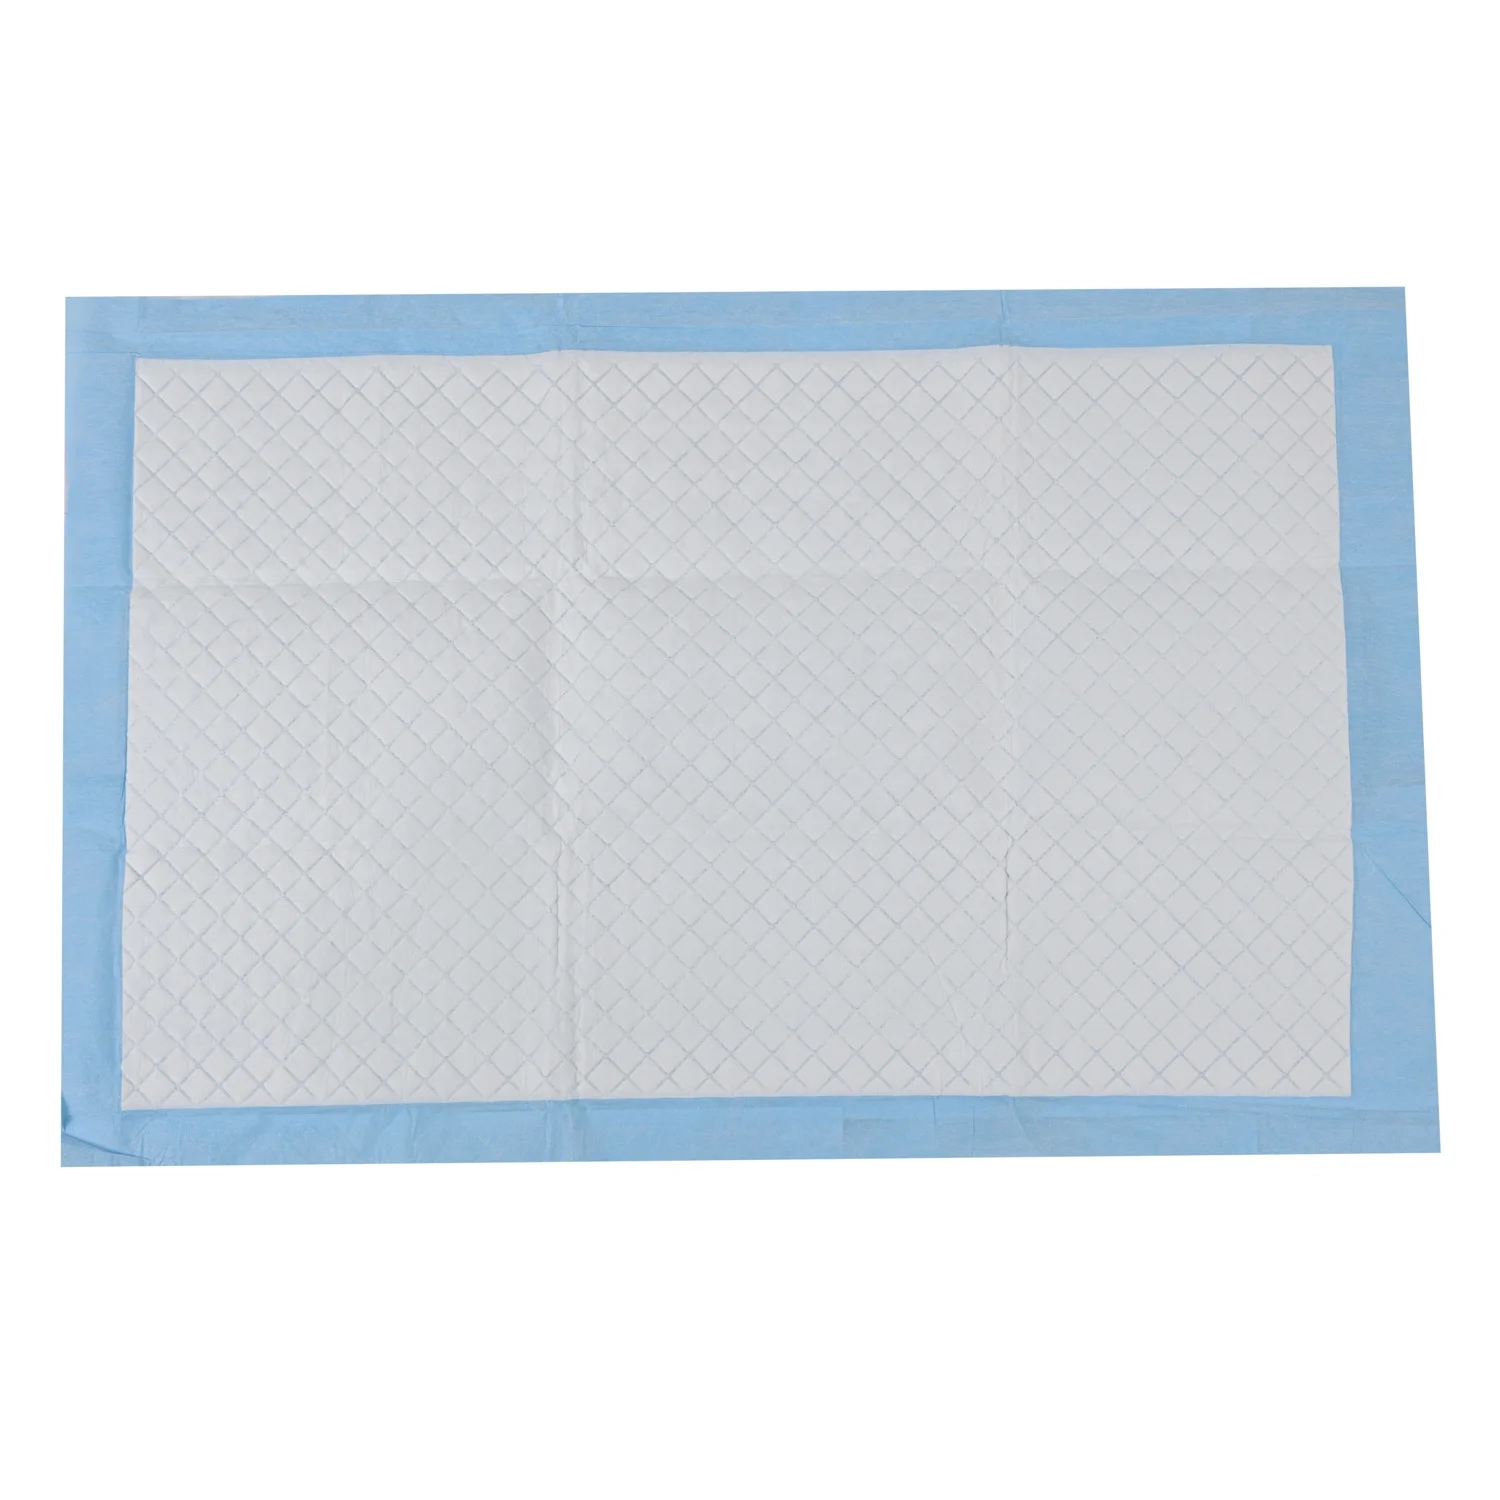 Heavy Absorbency Bed Pads, Underpad, Pads for Adult Incontinence